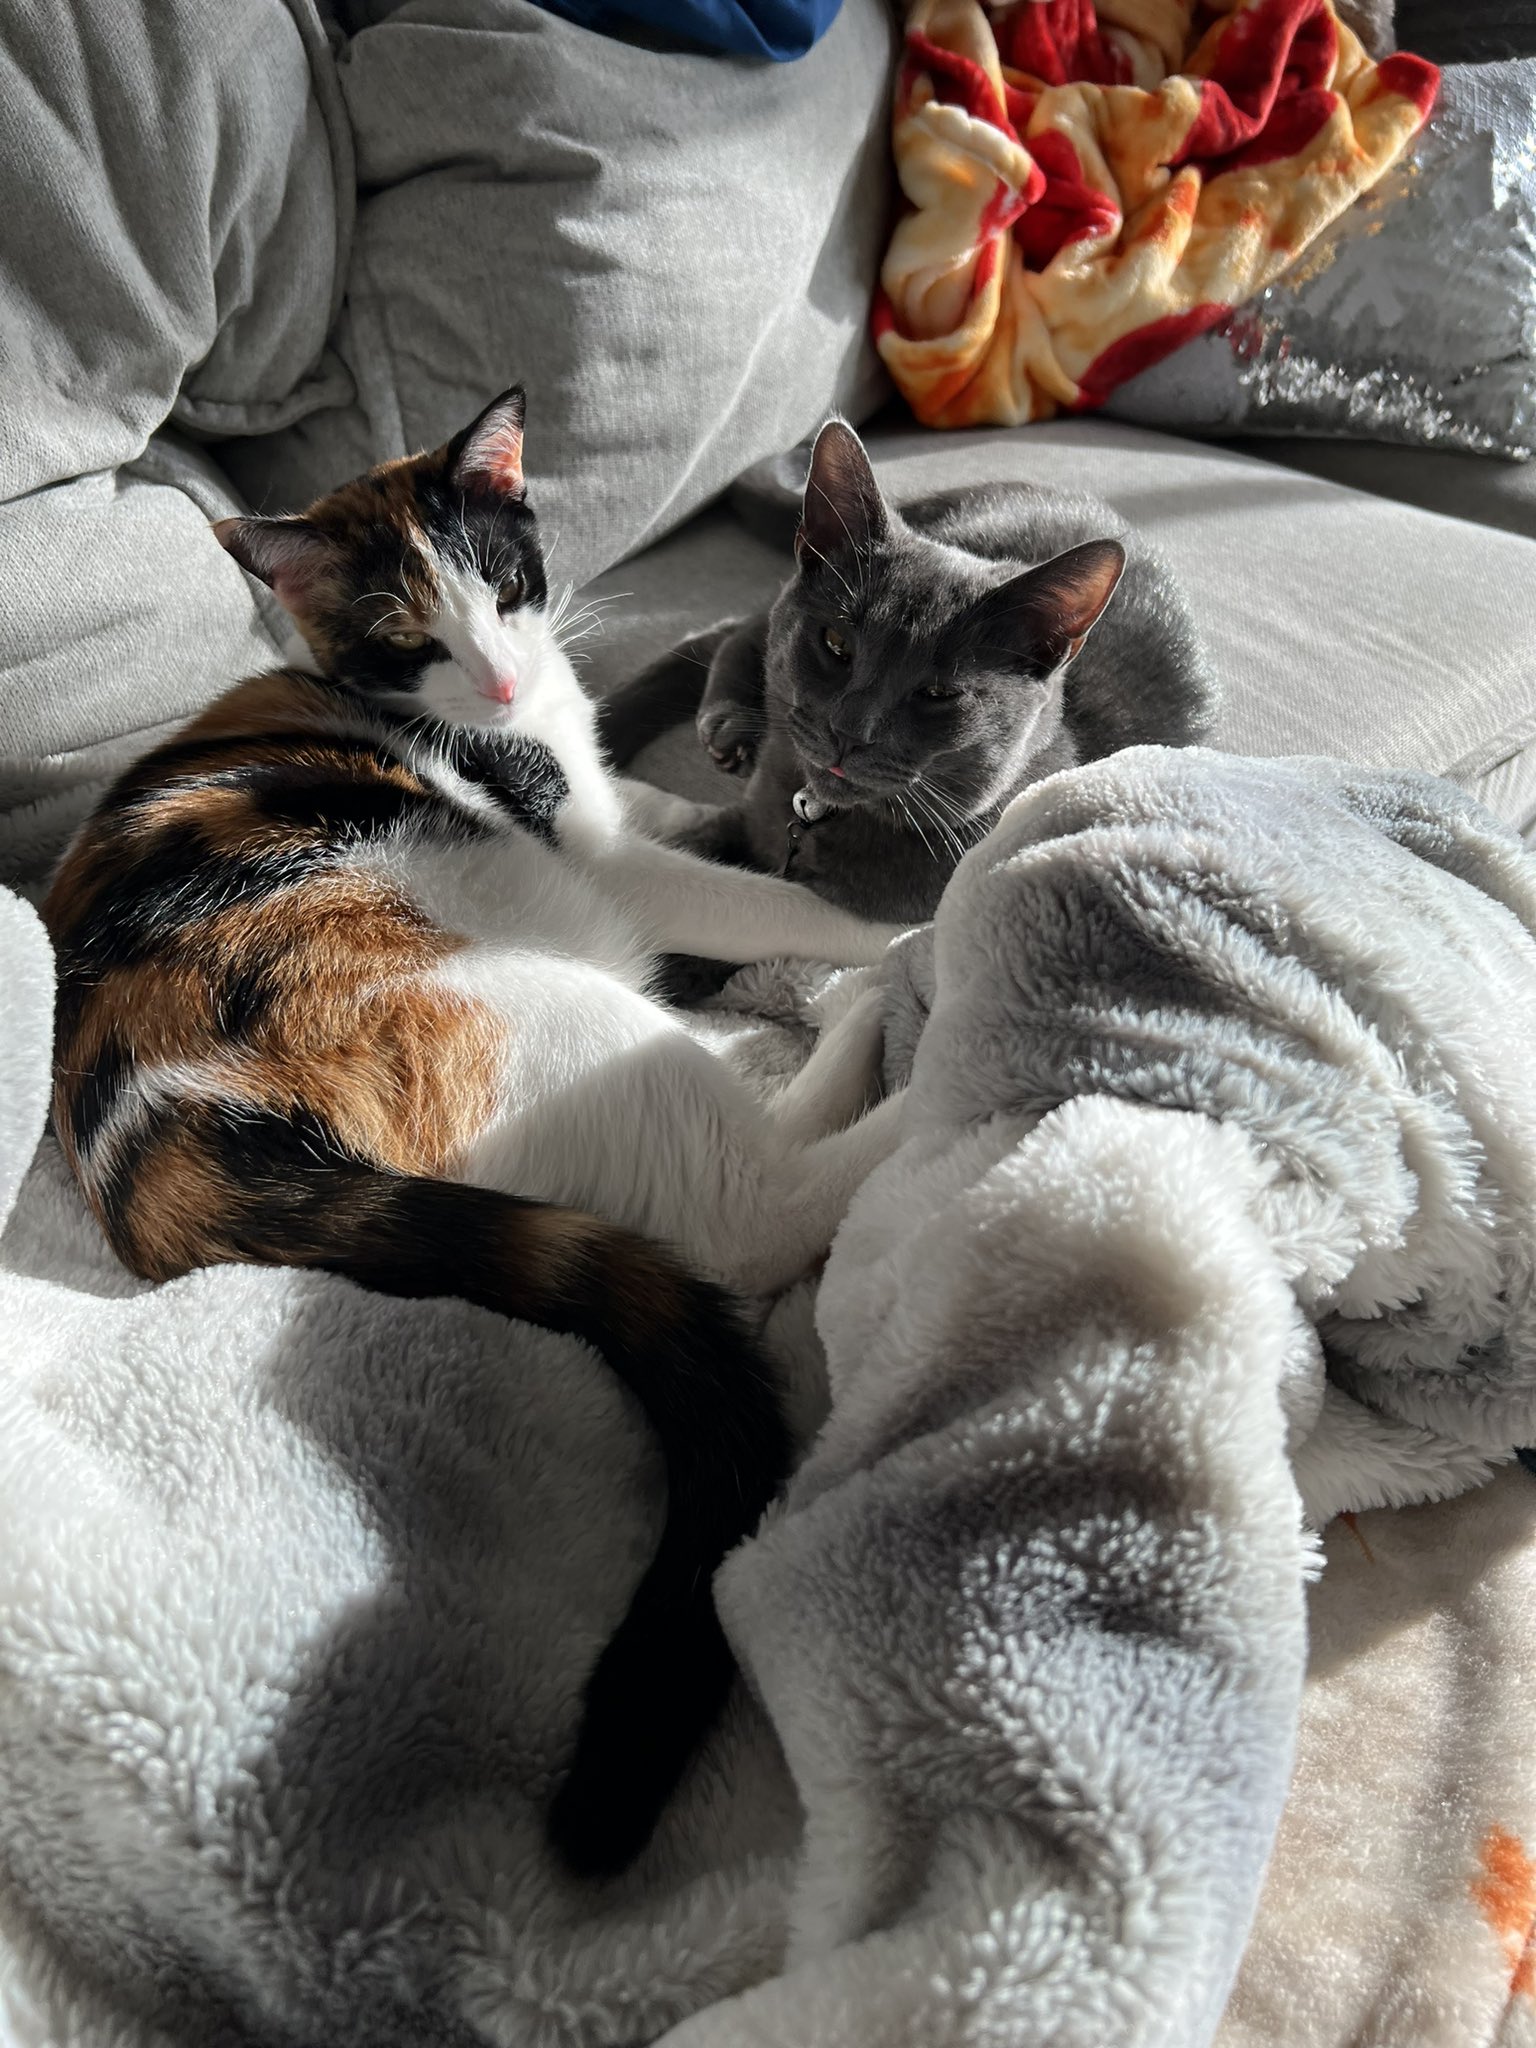 Two cats, one a calico cat and one a gray cat, curled up on a couch